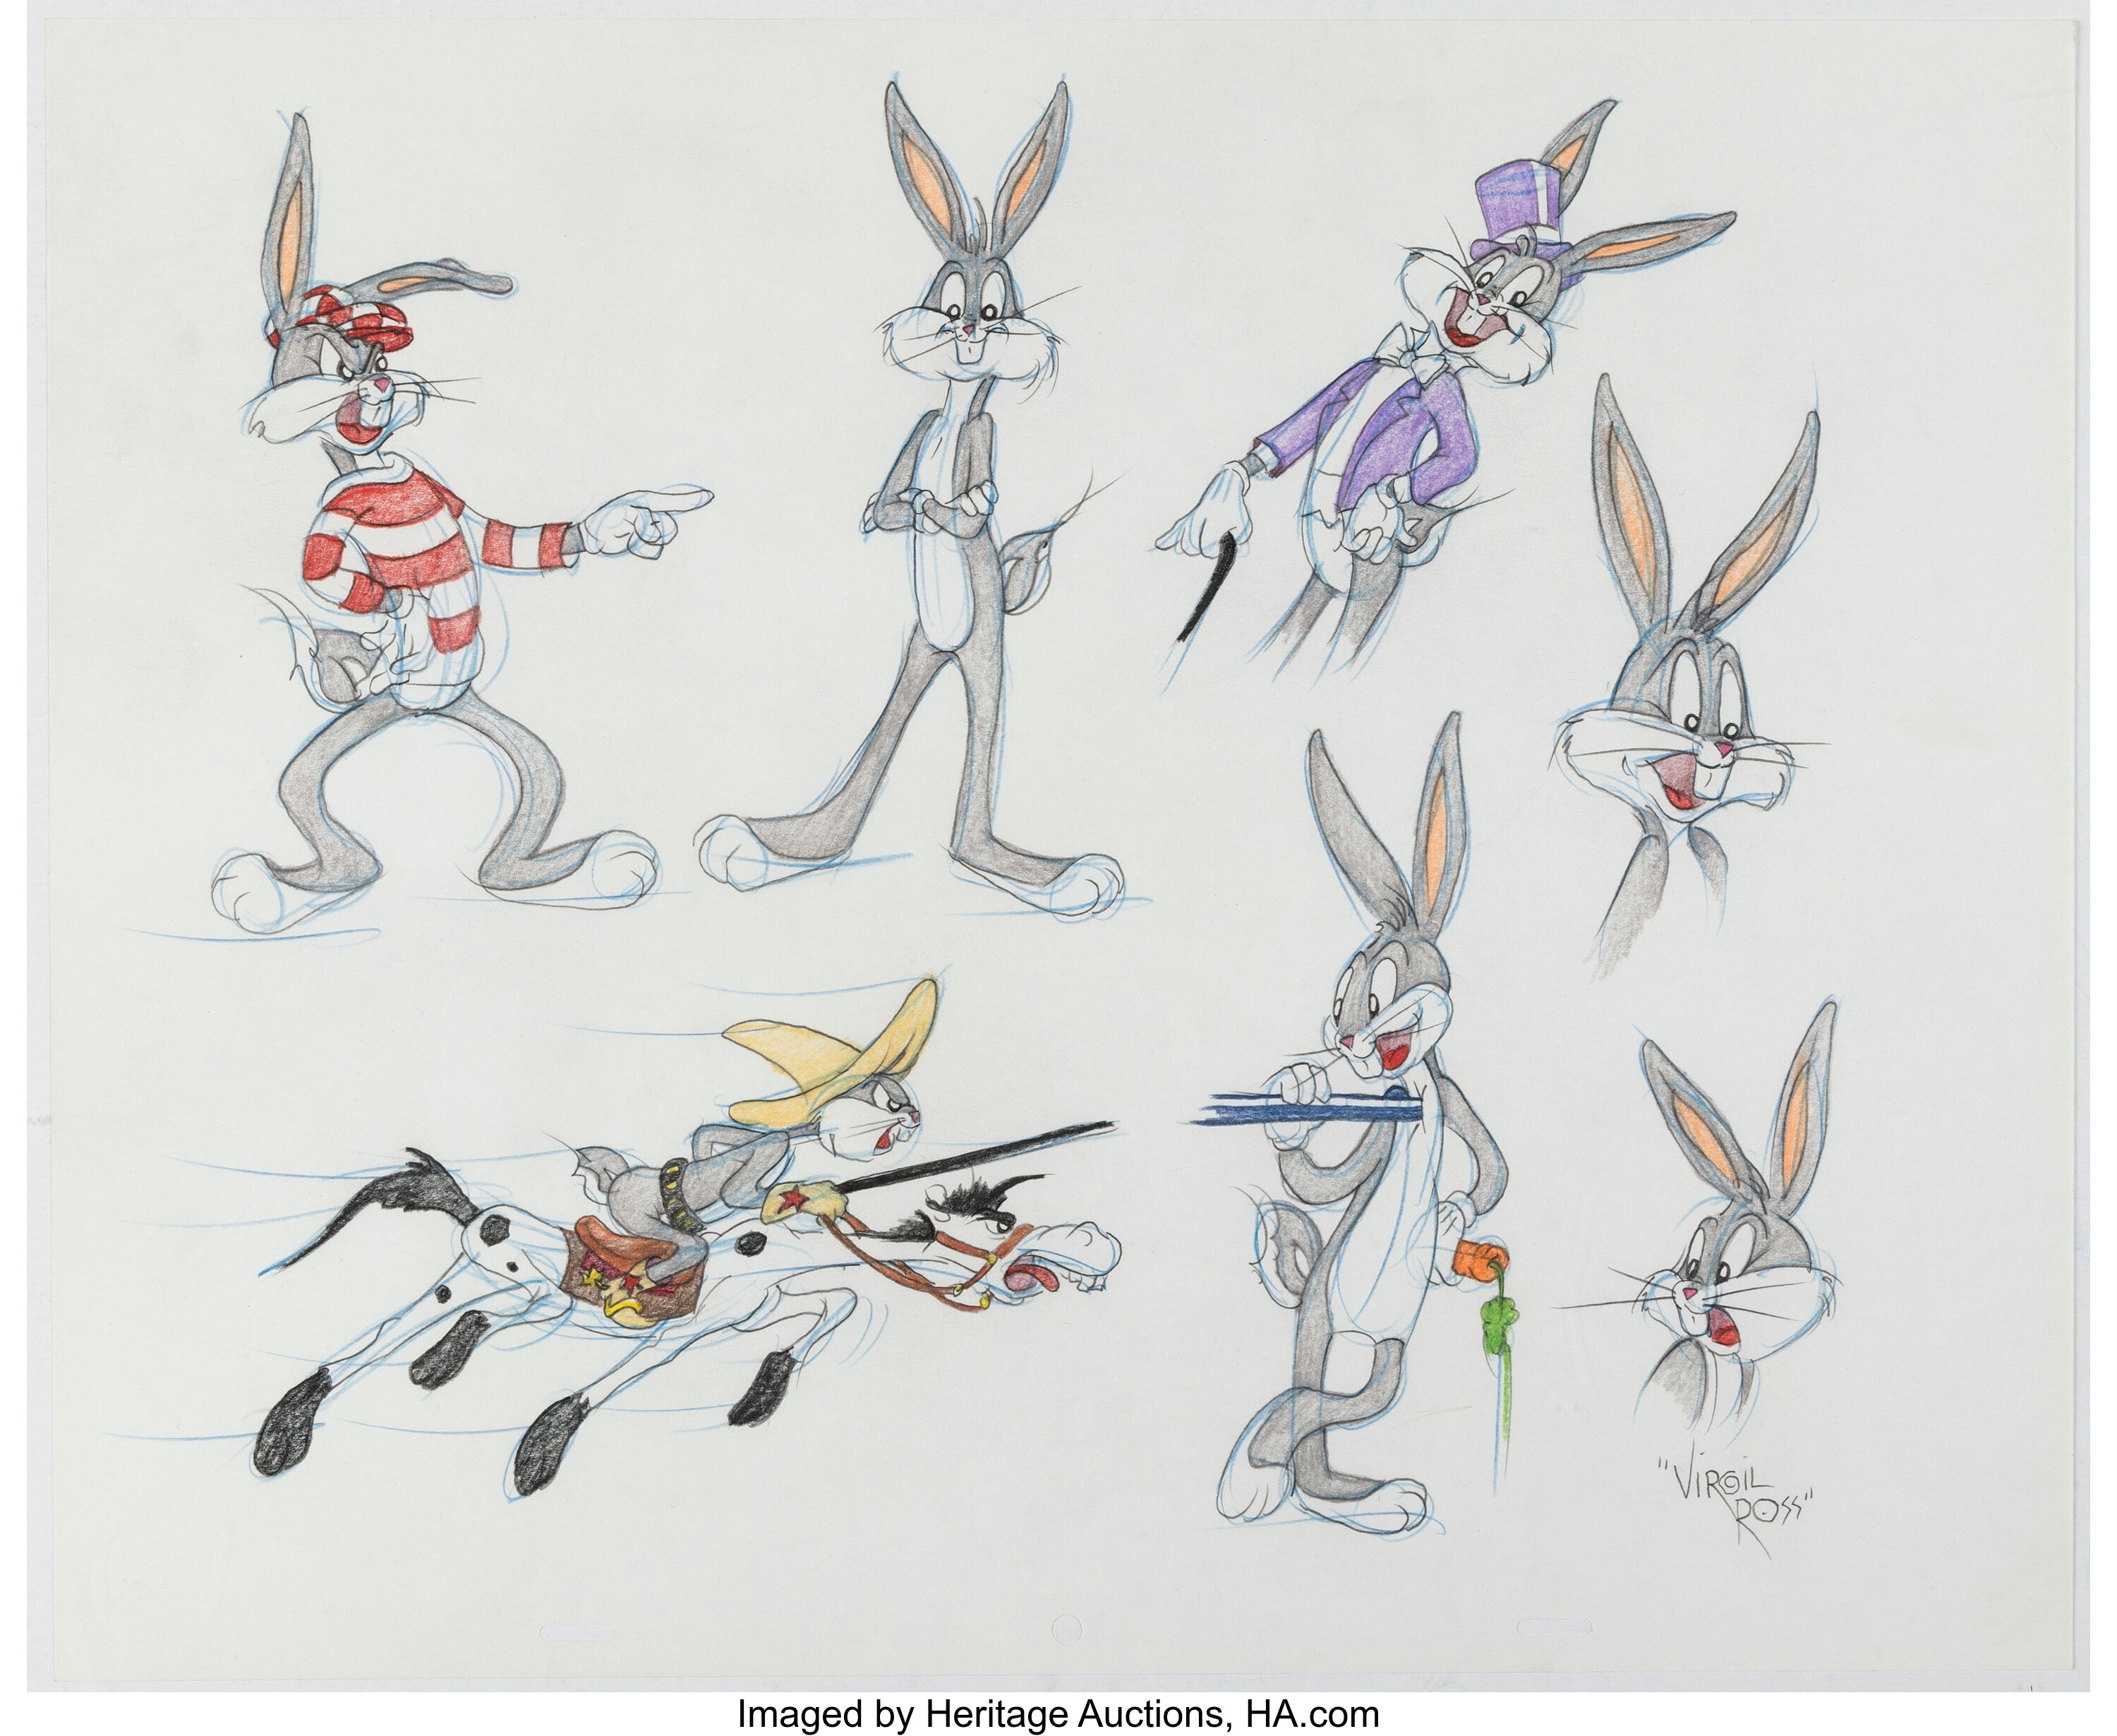 Virgil Ross - Speedy Gonzales and Sylvester Model Sheet Drawing